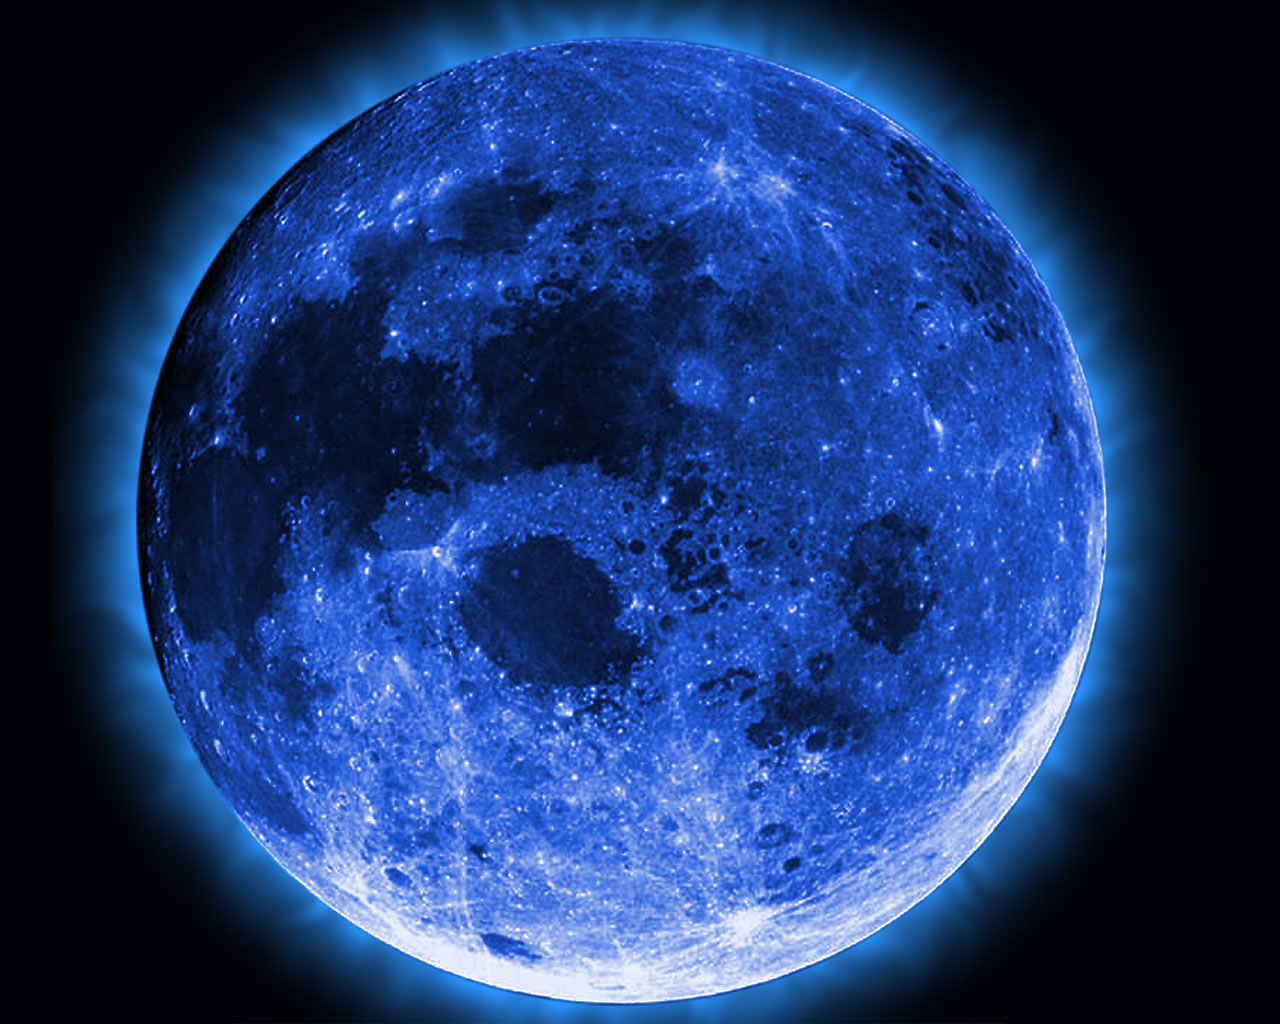 Moon HD Wallpaper Check Out The Cool Image High